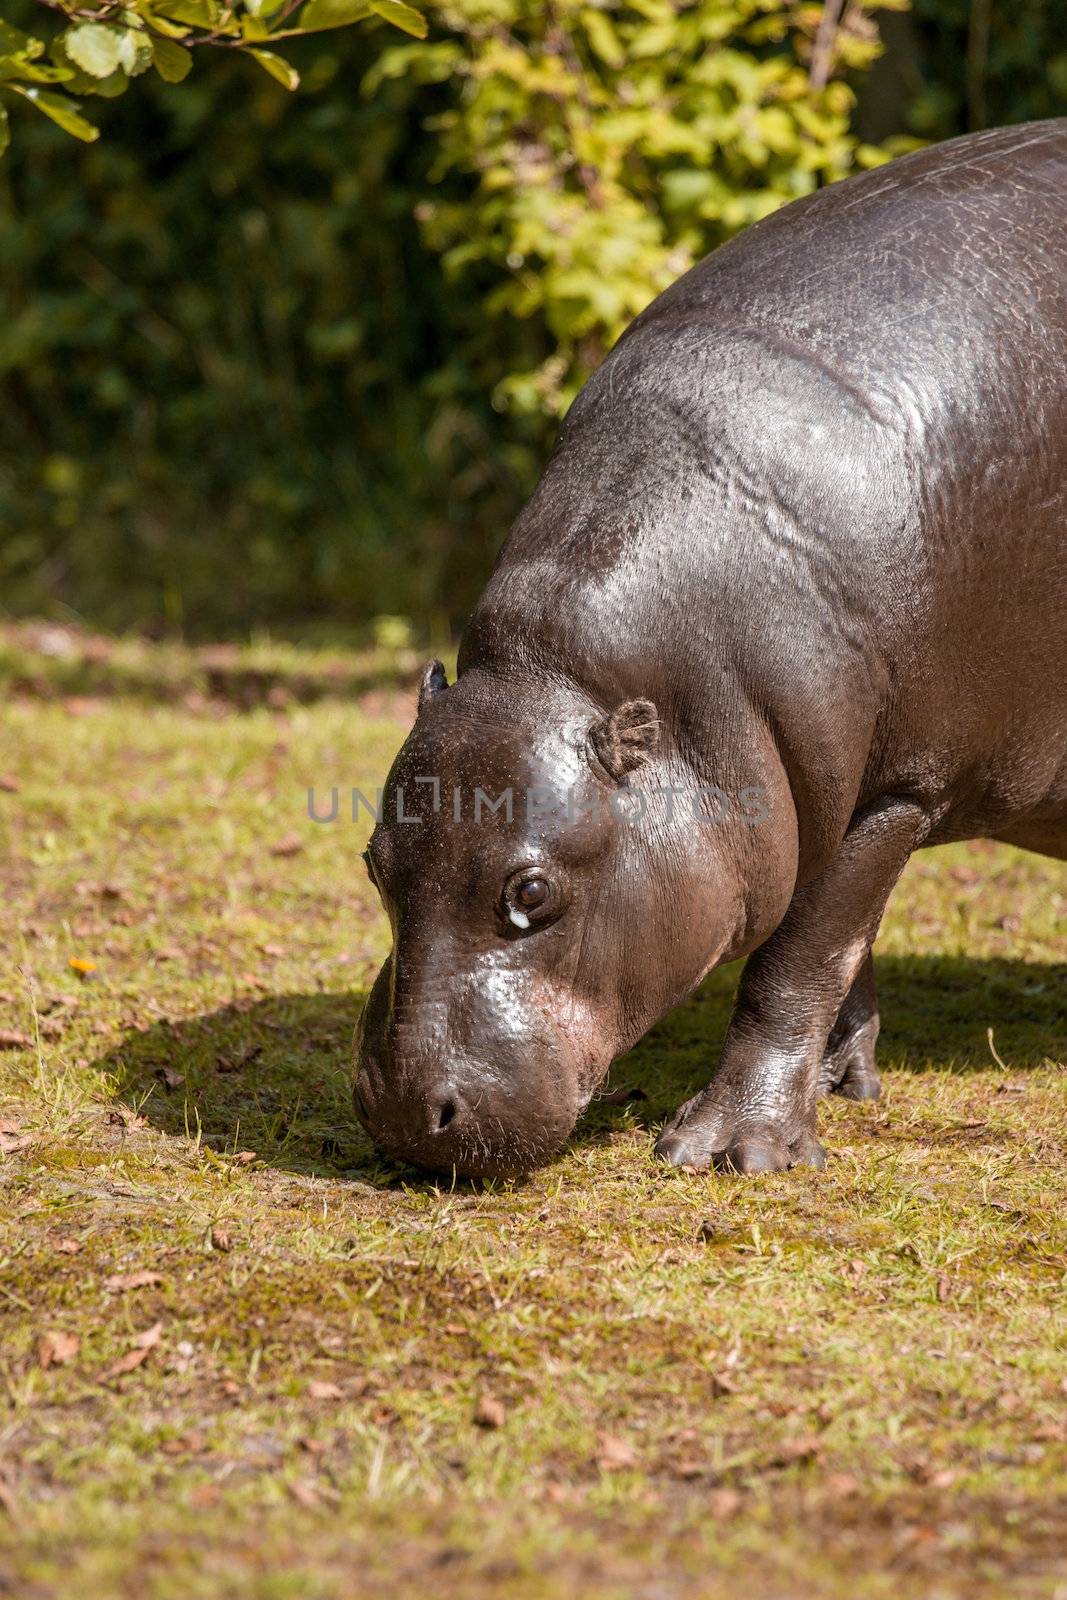 Small hippopotamus looking for food by Sportactive